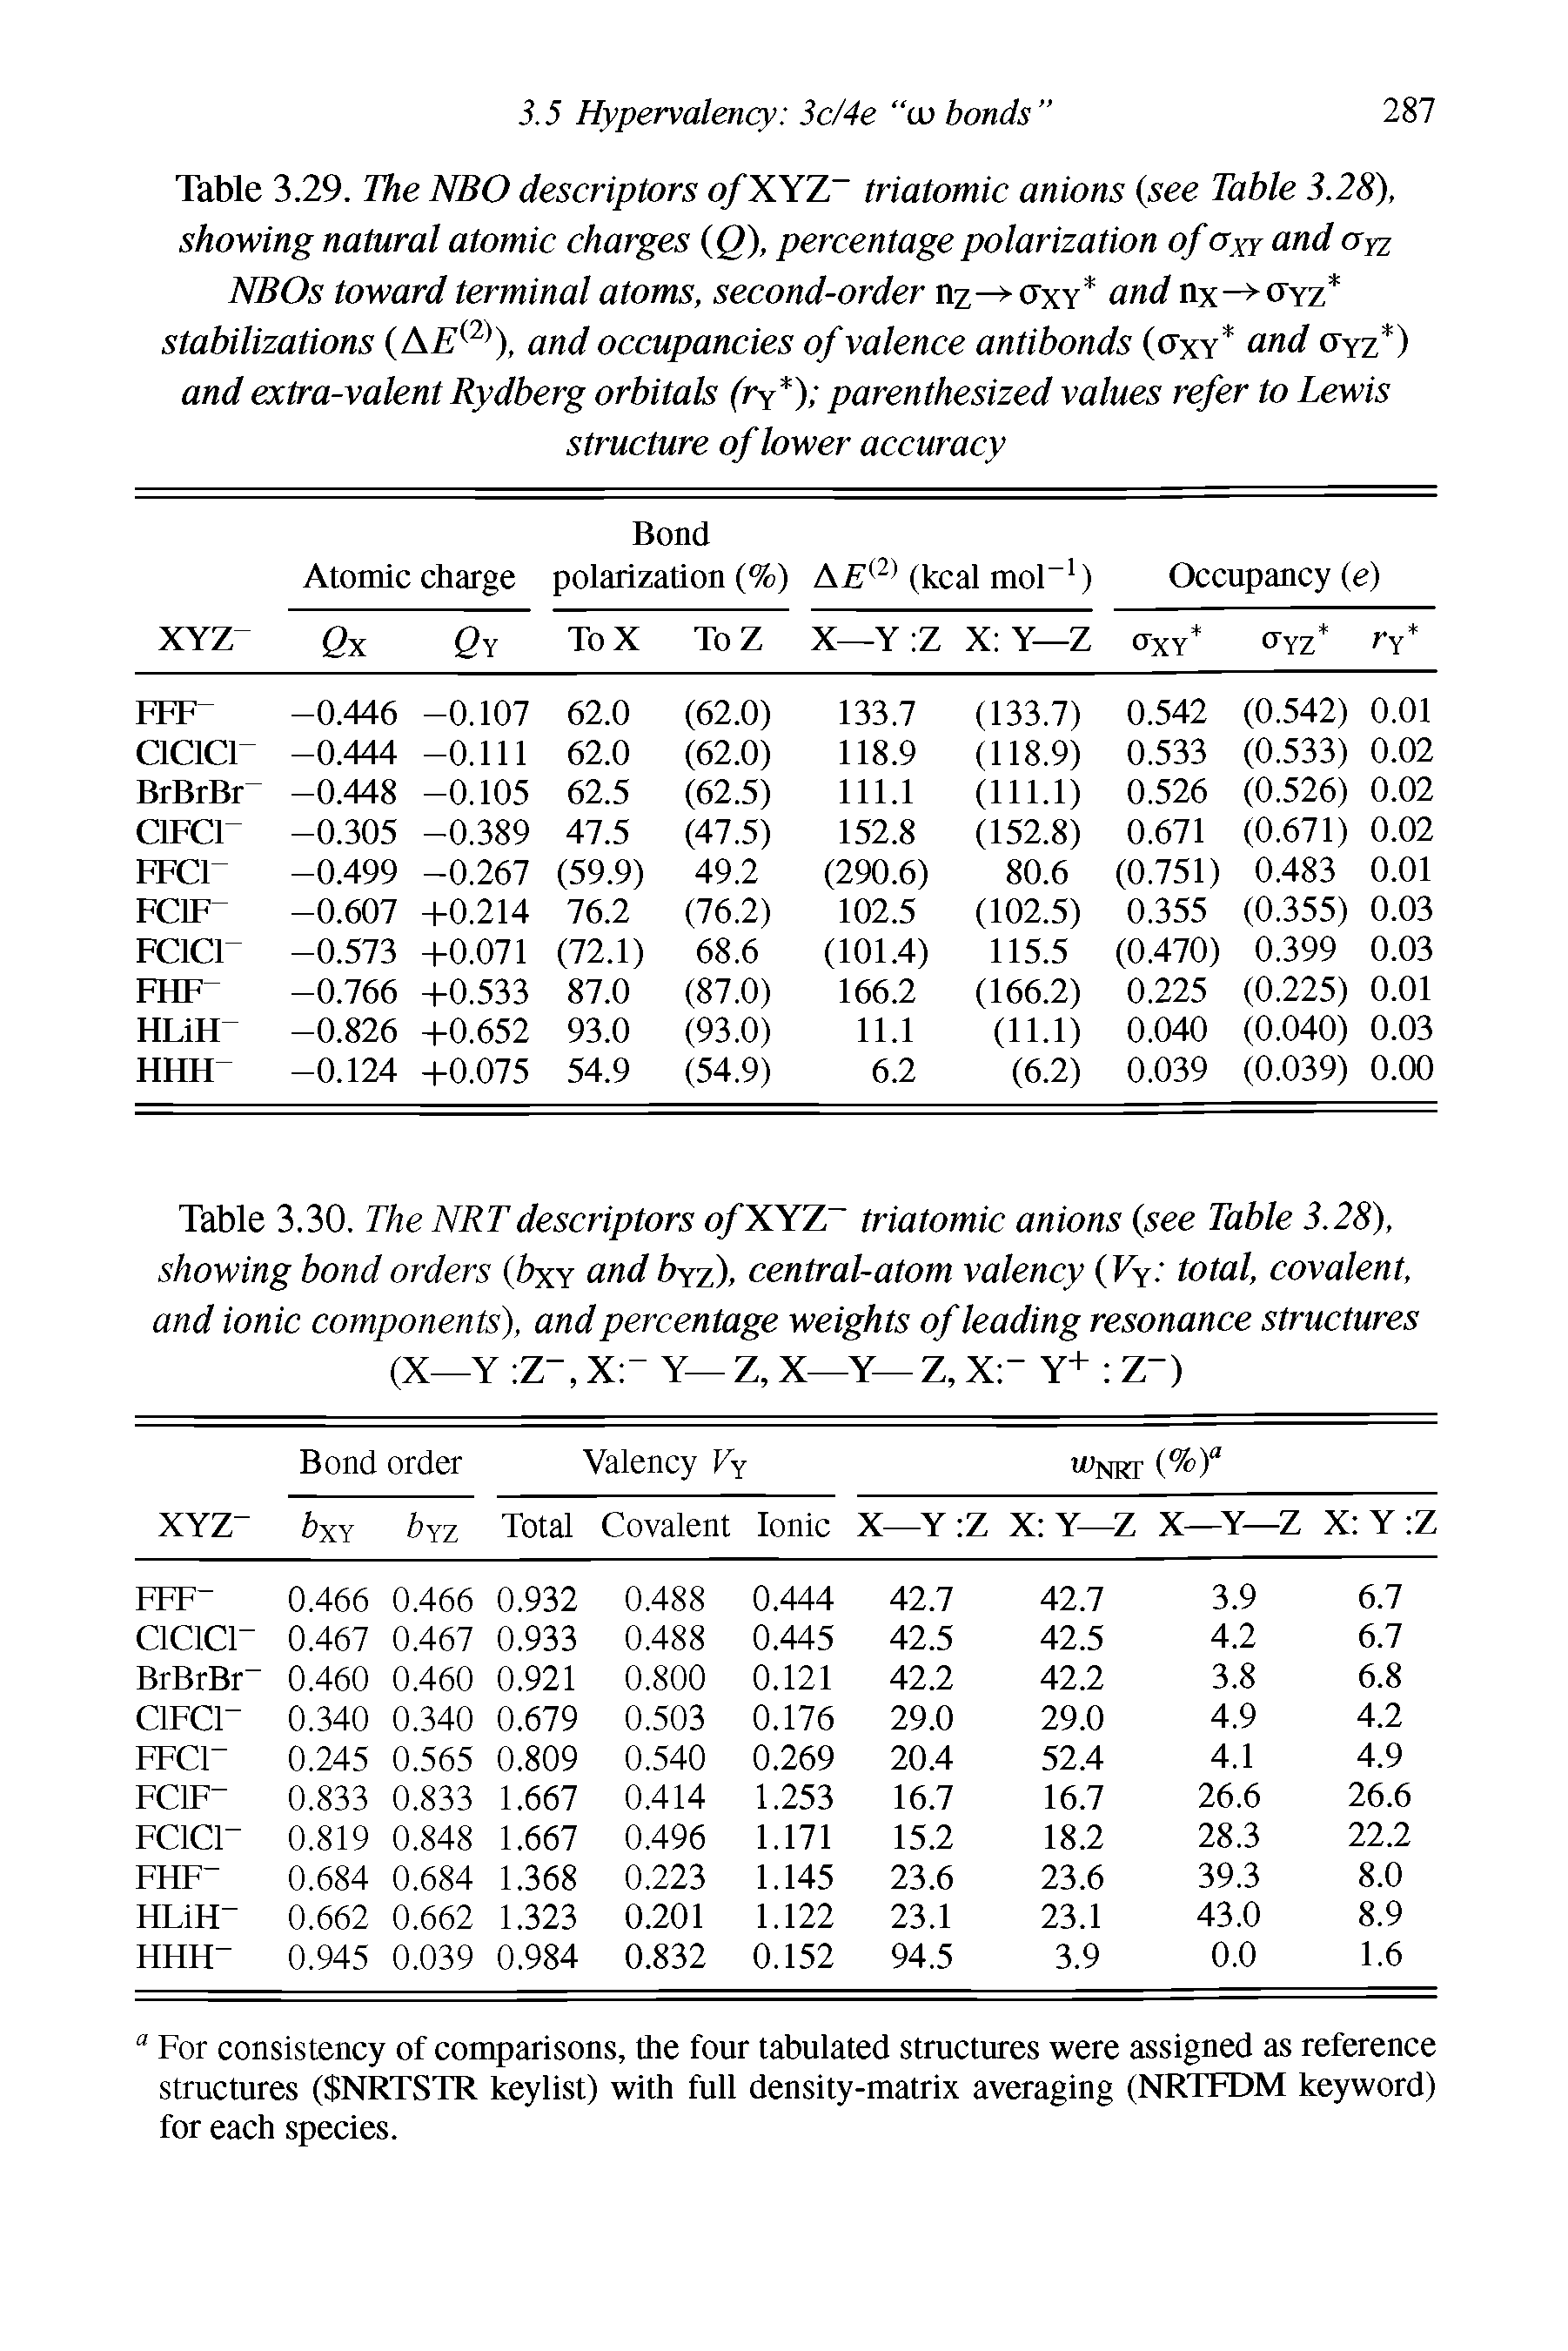 Table 3.29. The NBO descriptors of XYZ triatomic anions (see Table 3.28), showing natural atomic charges (Q), percentage polarization of oxy and ayz NBOs toward terminal atoms, second-order nz— oxy and nx->OYZ stabilizations (A/s(2)), and occupancies of valence antibonds (oxy and ayz ) and extra-valent Rydberg orbitals (ry ) parenthesized values refer to Lewis structure of lower accuracy...